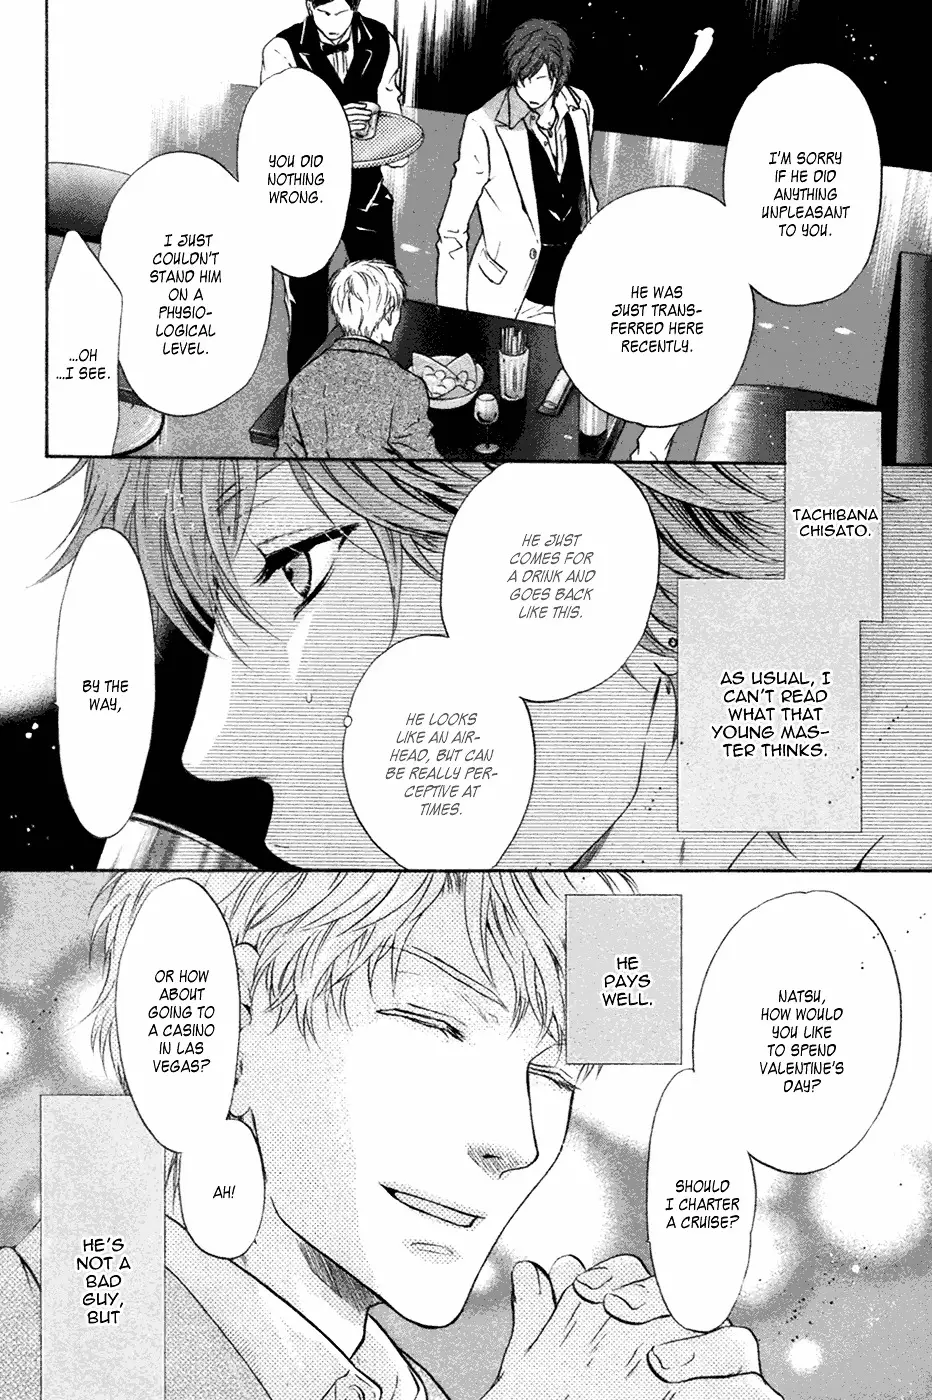 Super Lovers - 23 page 5-6f7fea7f